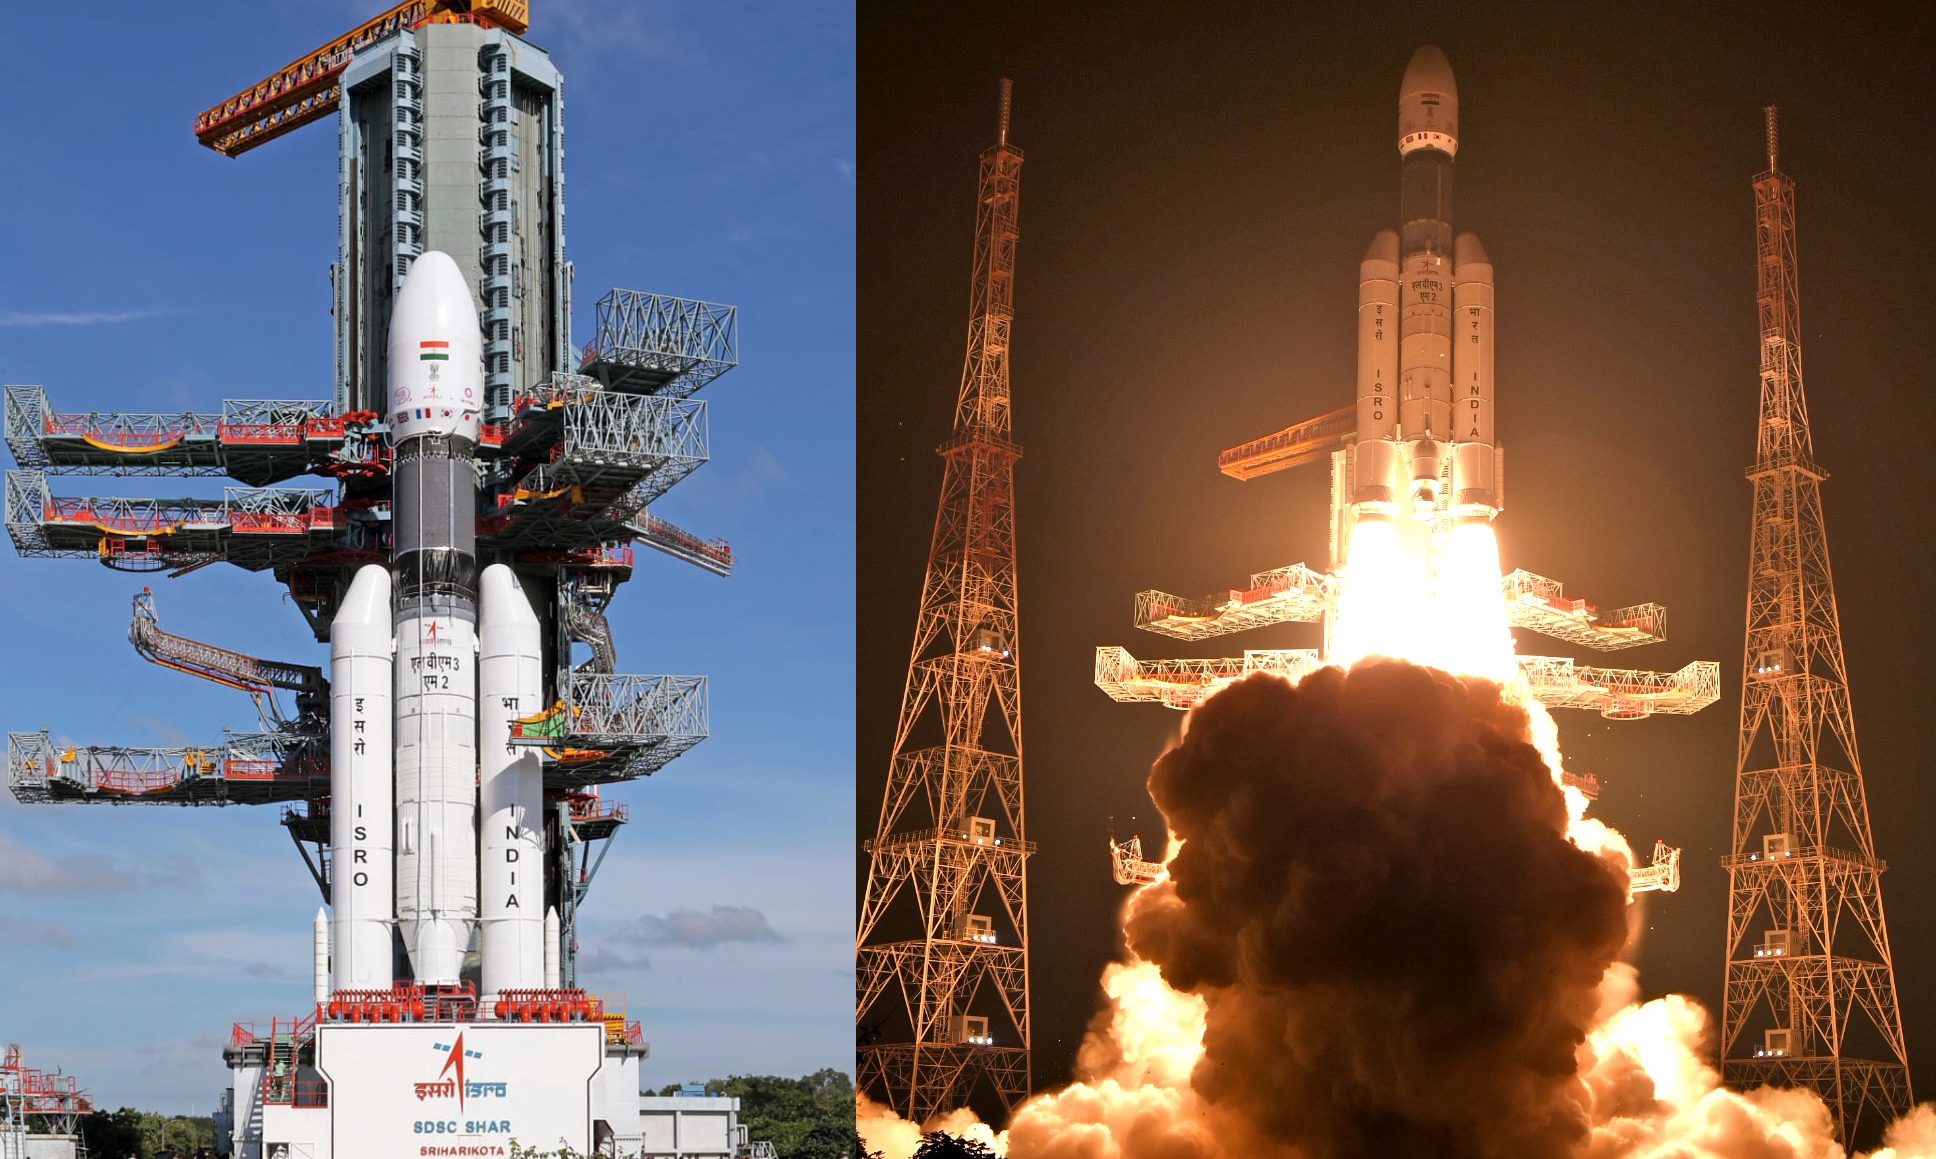 ISRO successfully launches 36 satellites in its heaviest LVM3M2 rocket